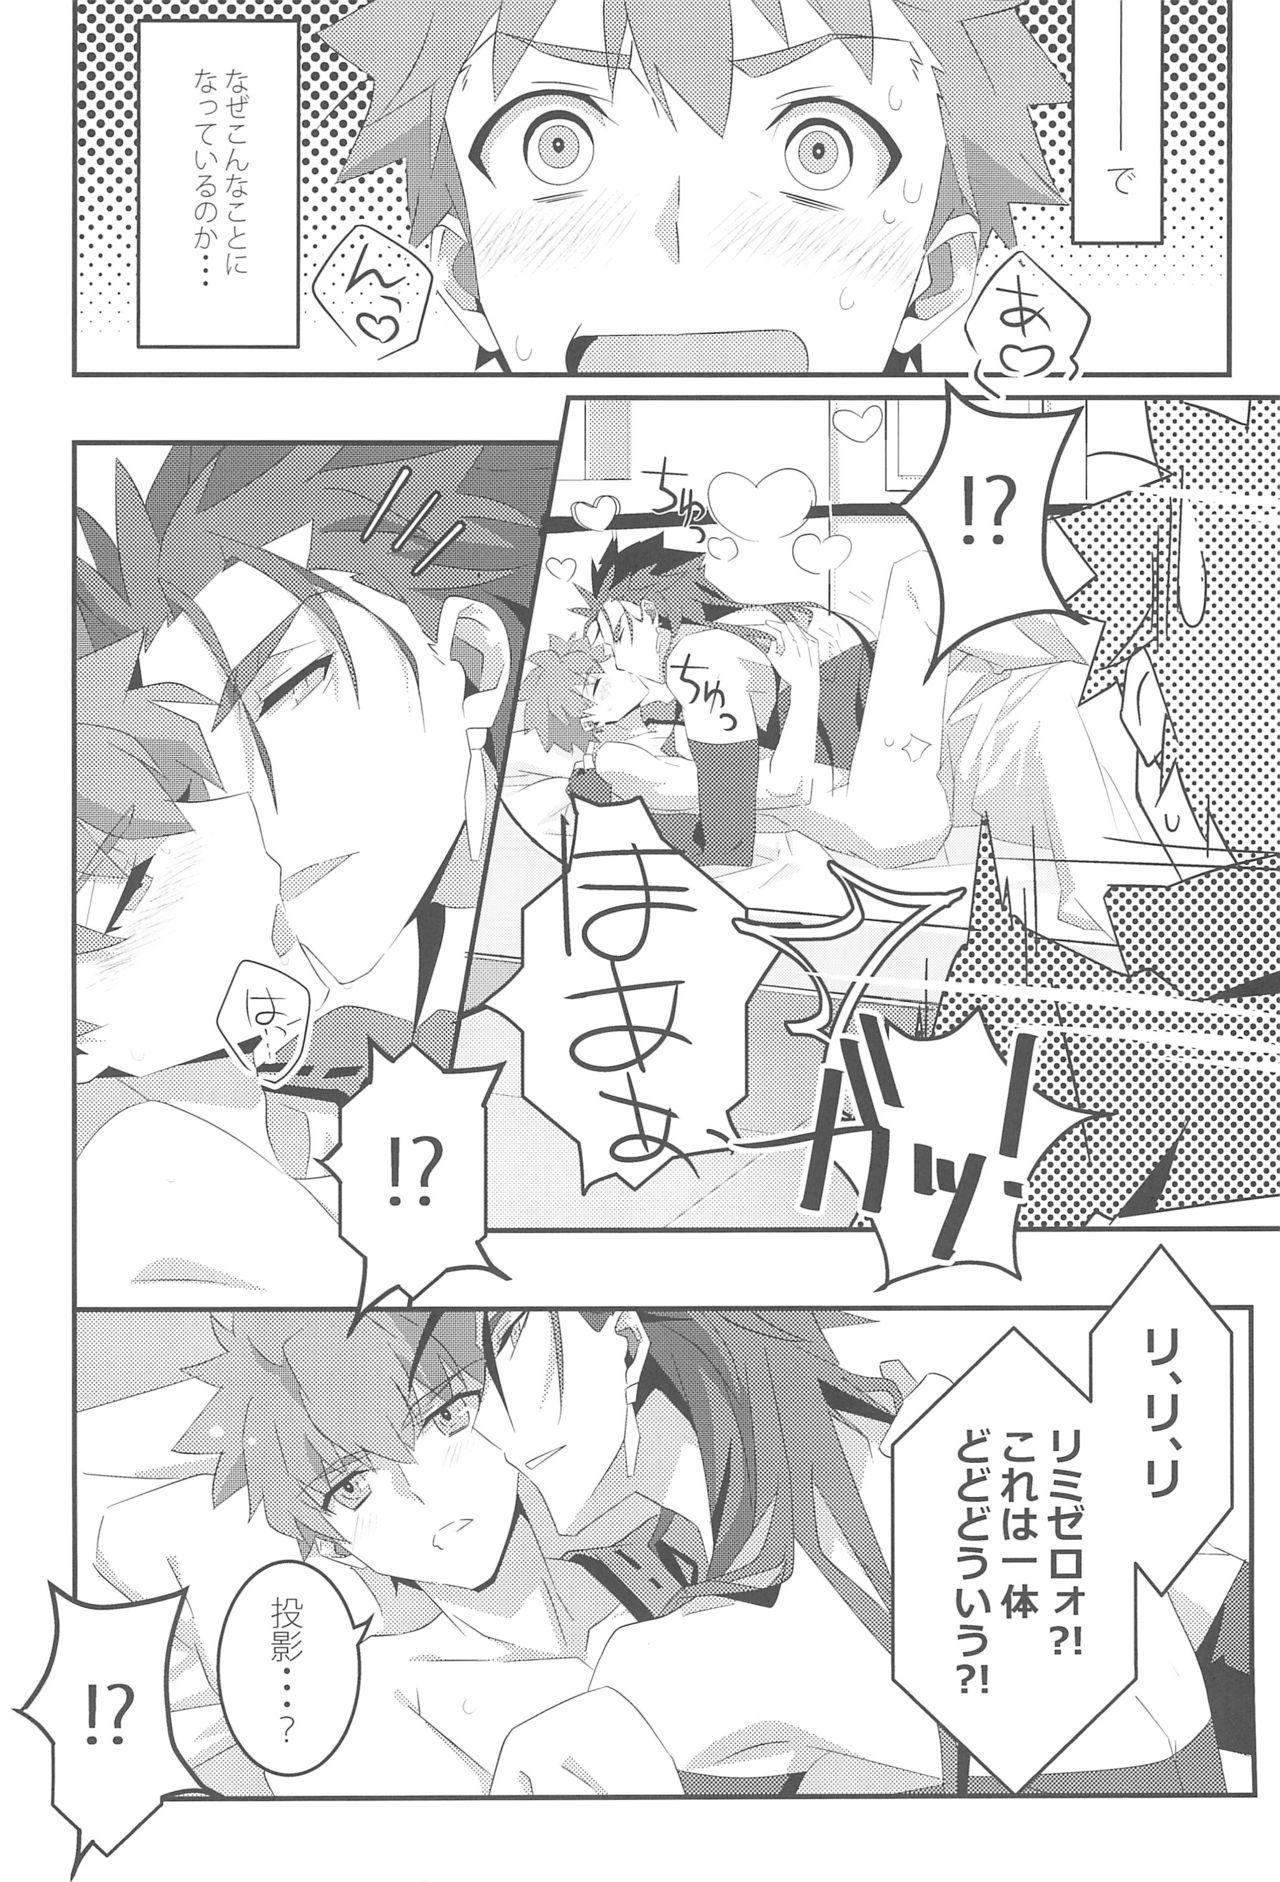 Girlfriends COME TO ME - Fate stay night Flashing - Page 6